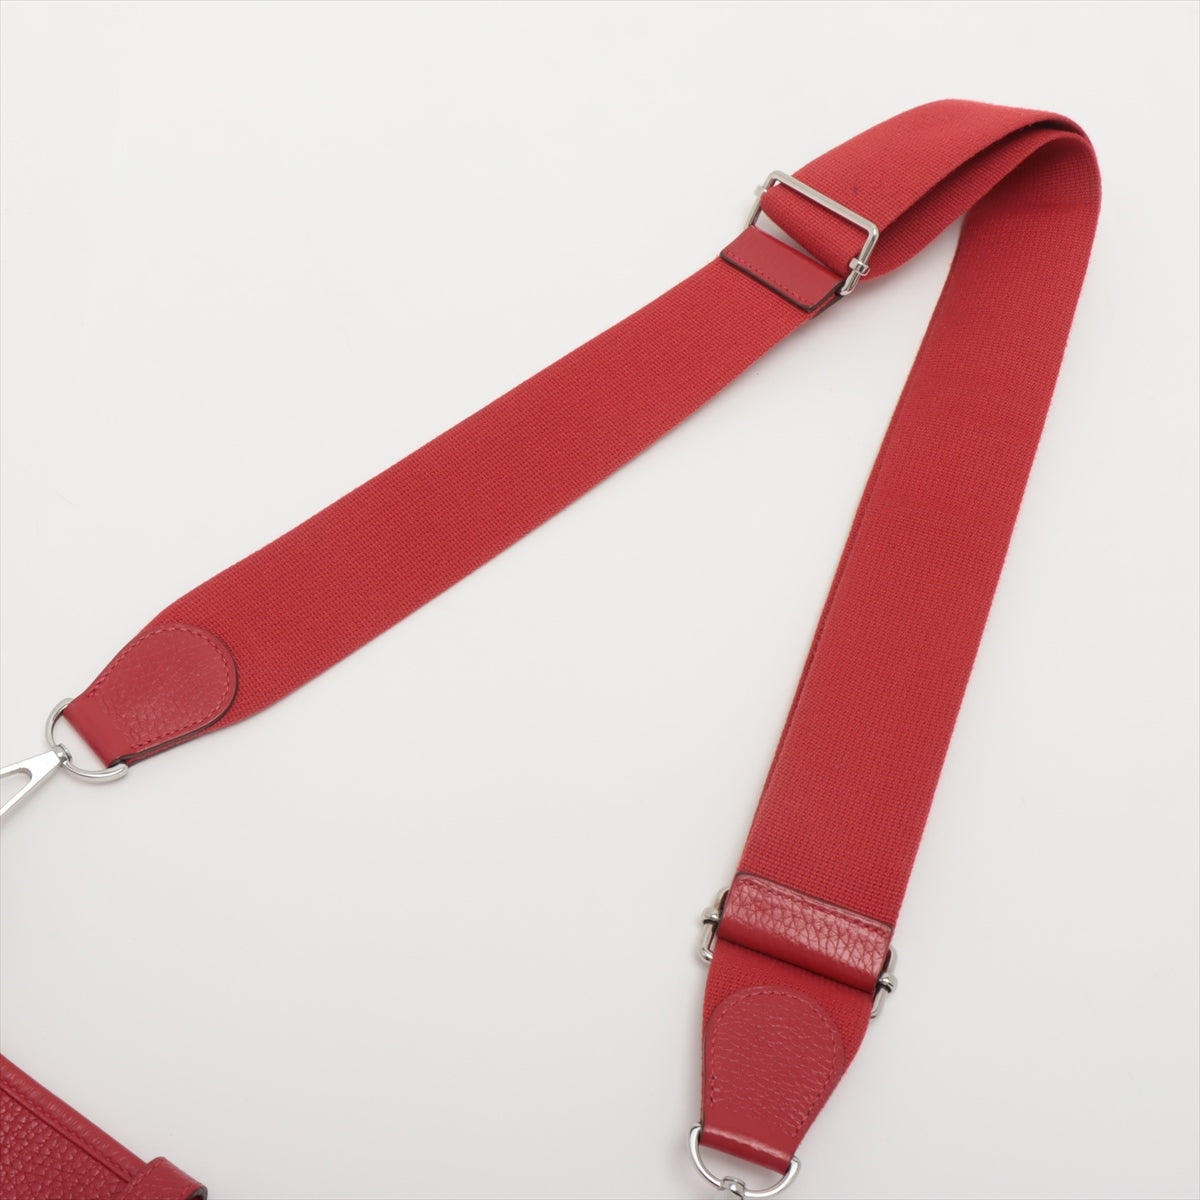 Hermès Evelyne 3 PM Taurillon Clemence Rouge casaque Silver Metal fittings A:2017